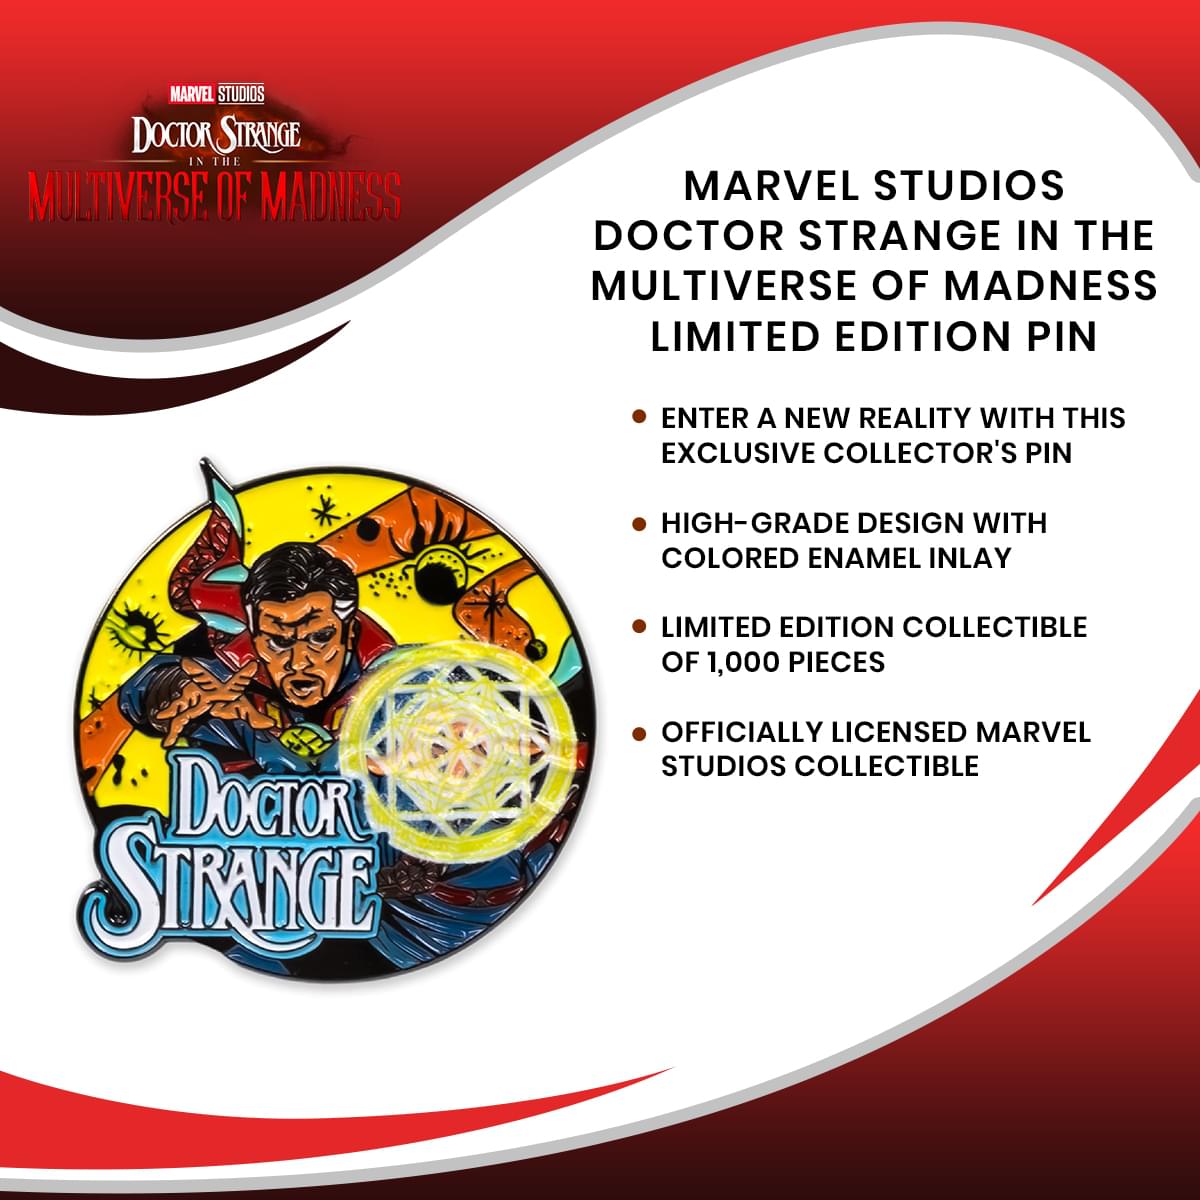 Marvel Studios Doctor Strange in the Multiverse of Madness Limited Edition Pin